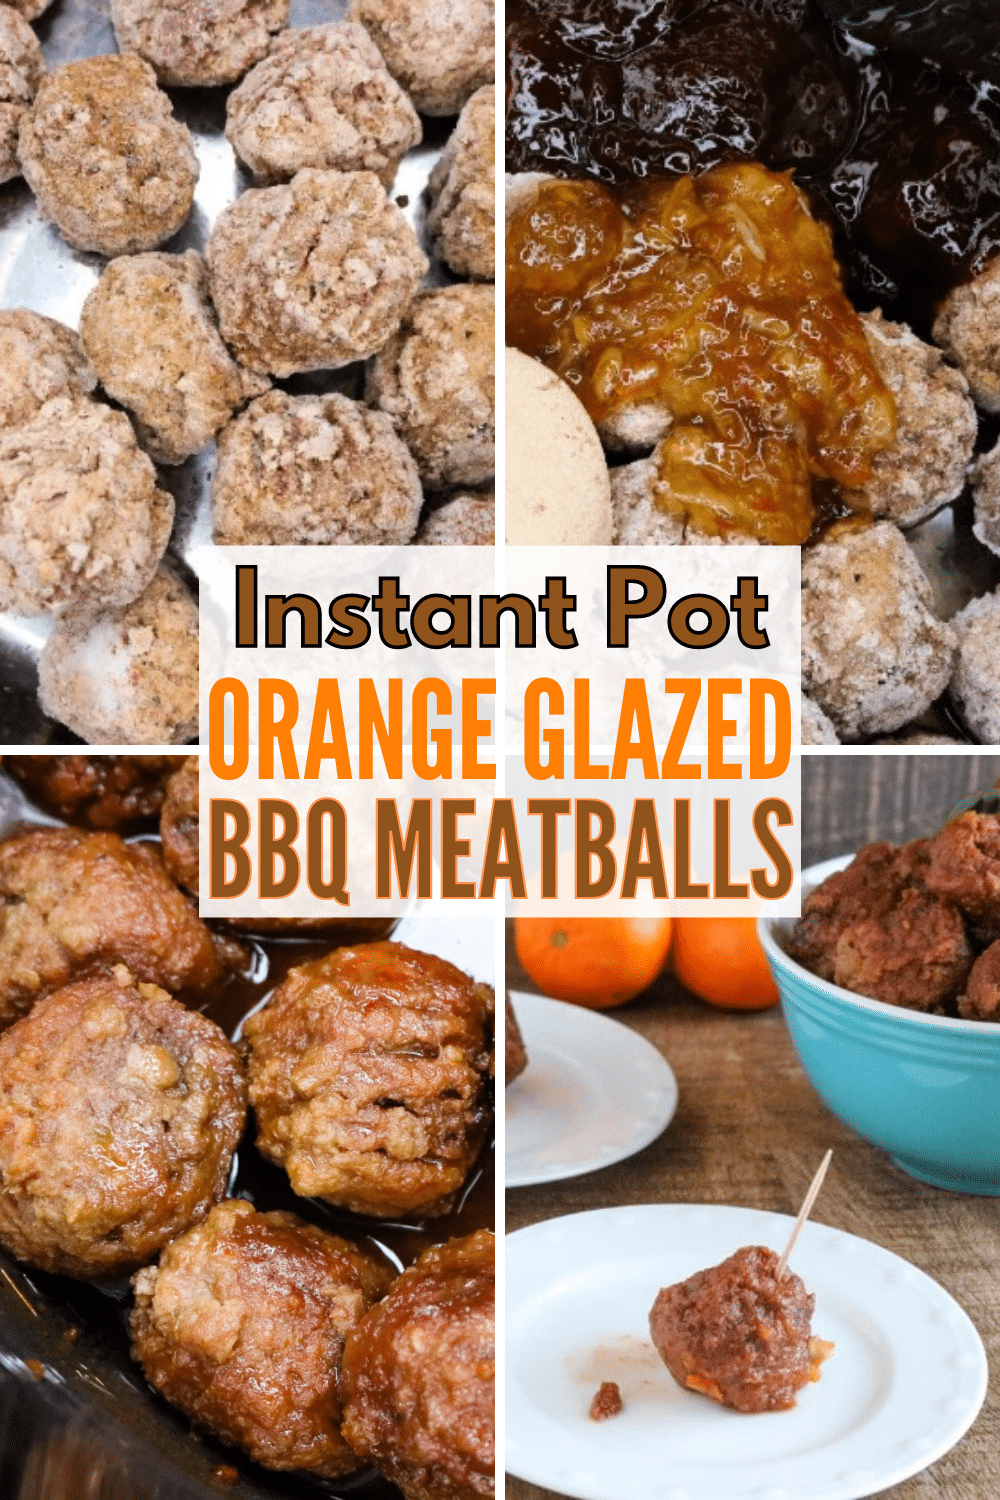 These orange glazed BBQ meatballs are so yummy! And they're also super easy to make in your Instant Pot. #instantpot #easyappetizer #kidfriendly via @wondermomwannab